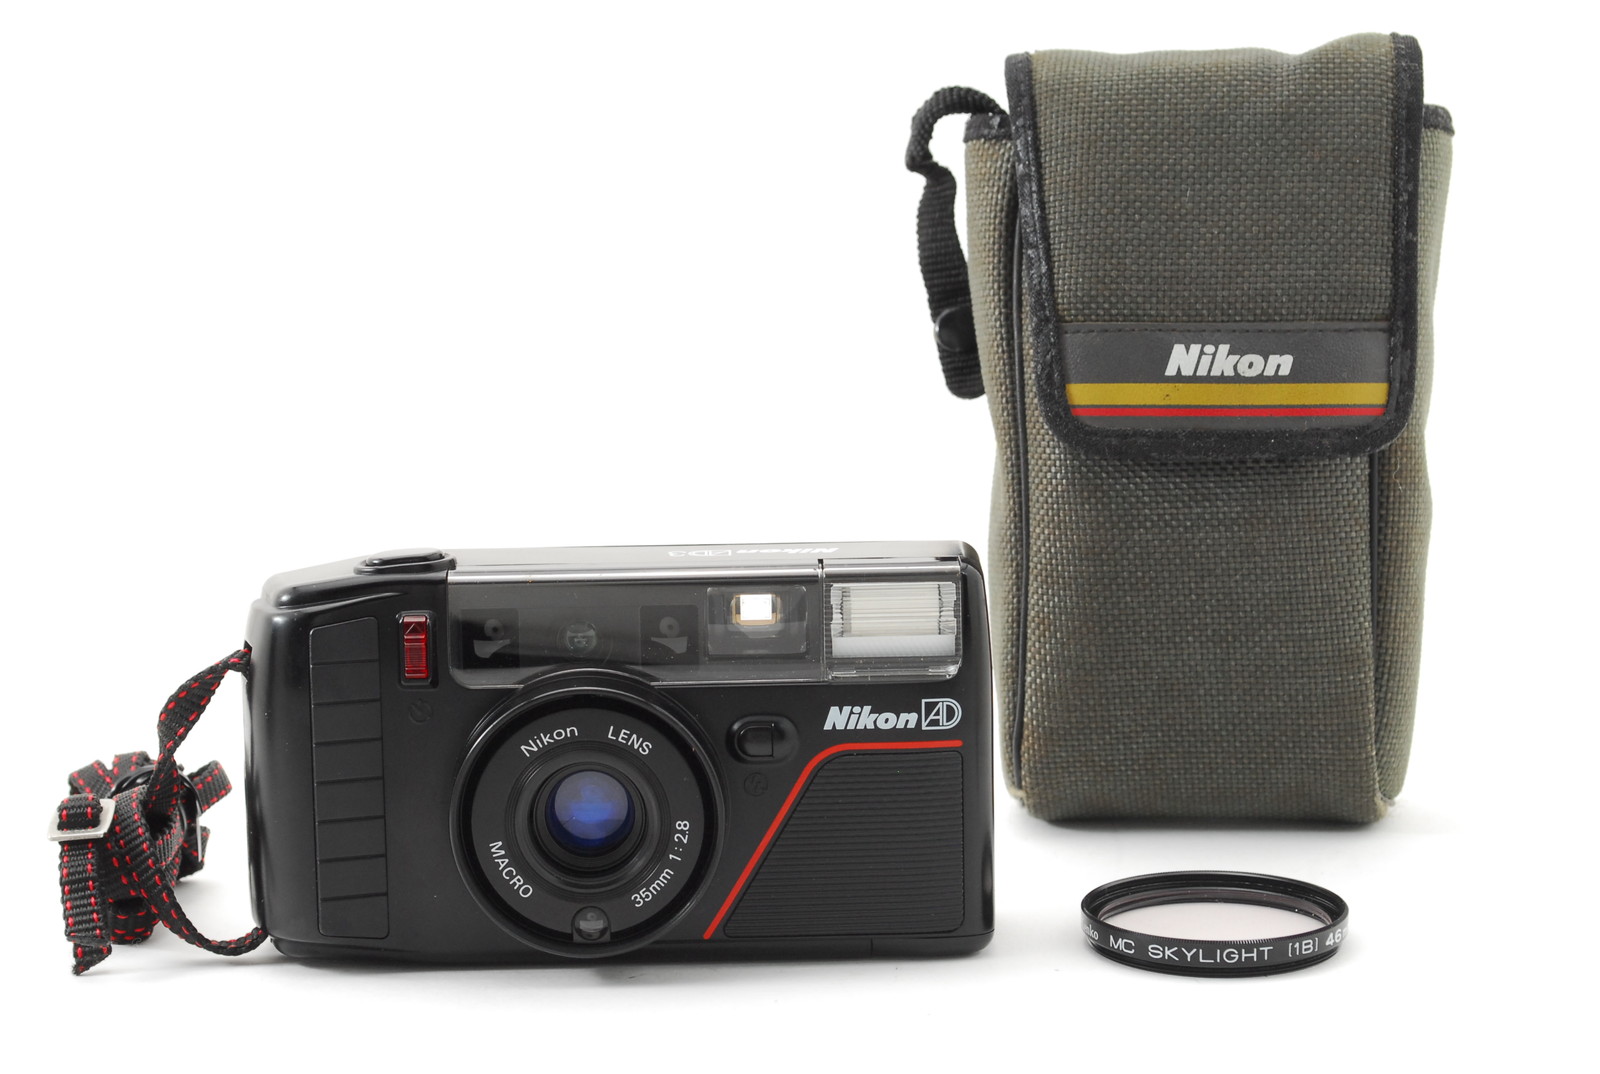 PROMOTION. NEAR MINT Nikon AD3 Pikaichi3, Strap, Genuine Case, Lens Filter 35mm Film Point and Shoot Camera from Japan